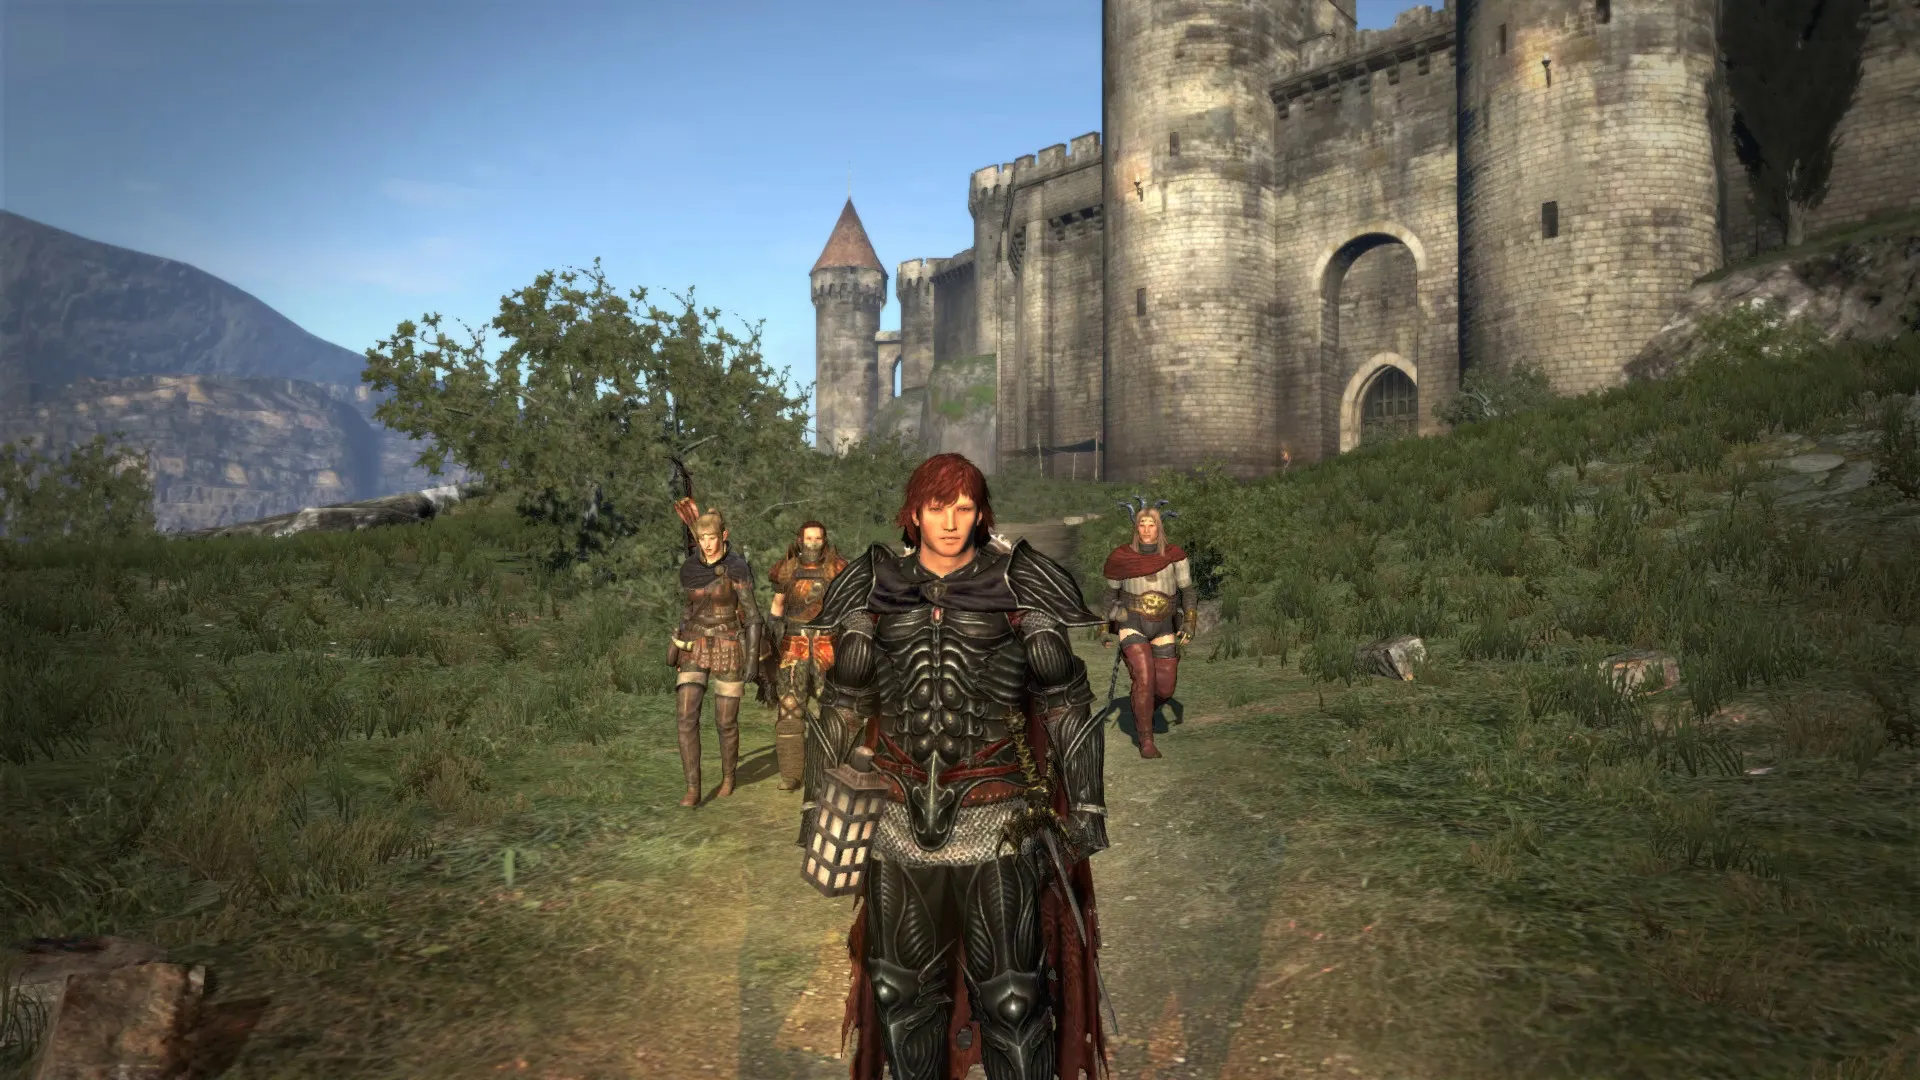 Best/most essential mods for Dragon's Dogma?